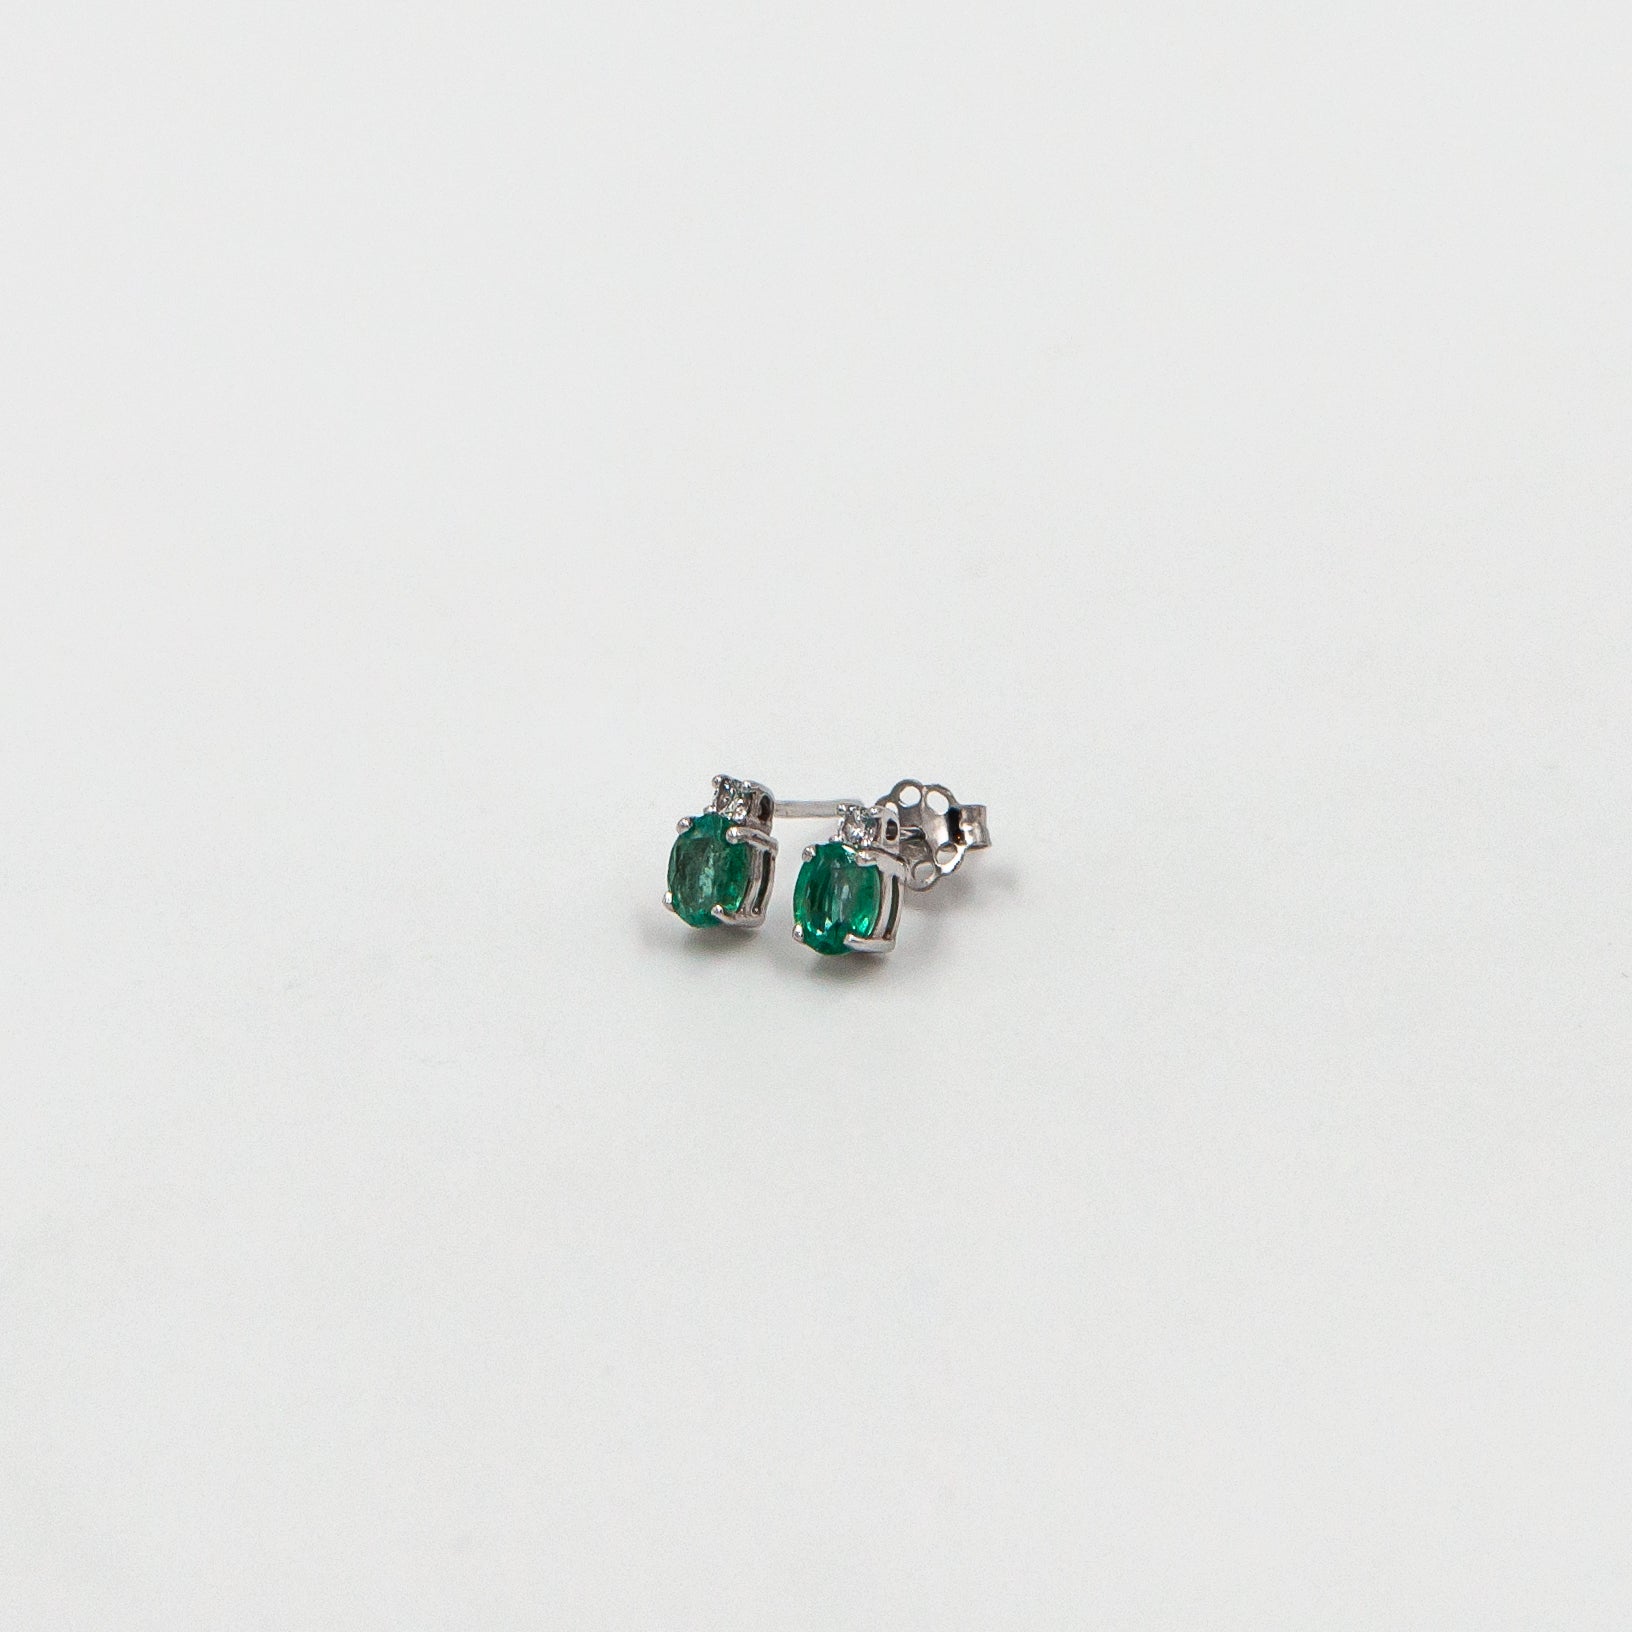 Droplets earrings with Emeralds and Diamonds